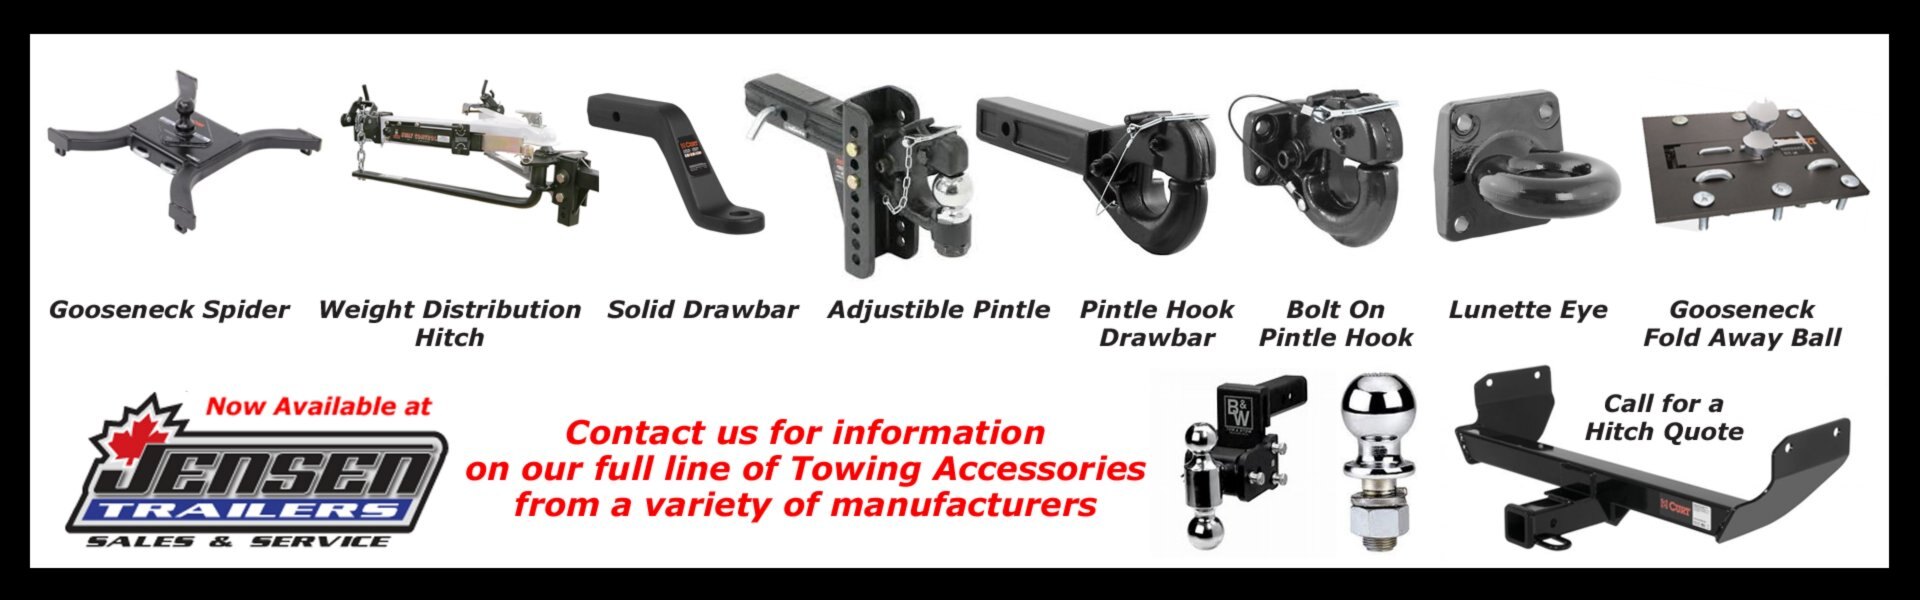 Towing Accessories_1920x600.jpg